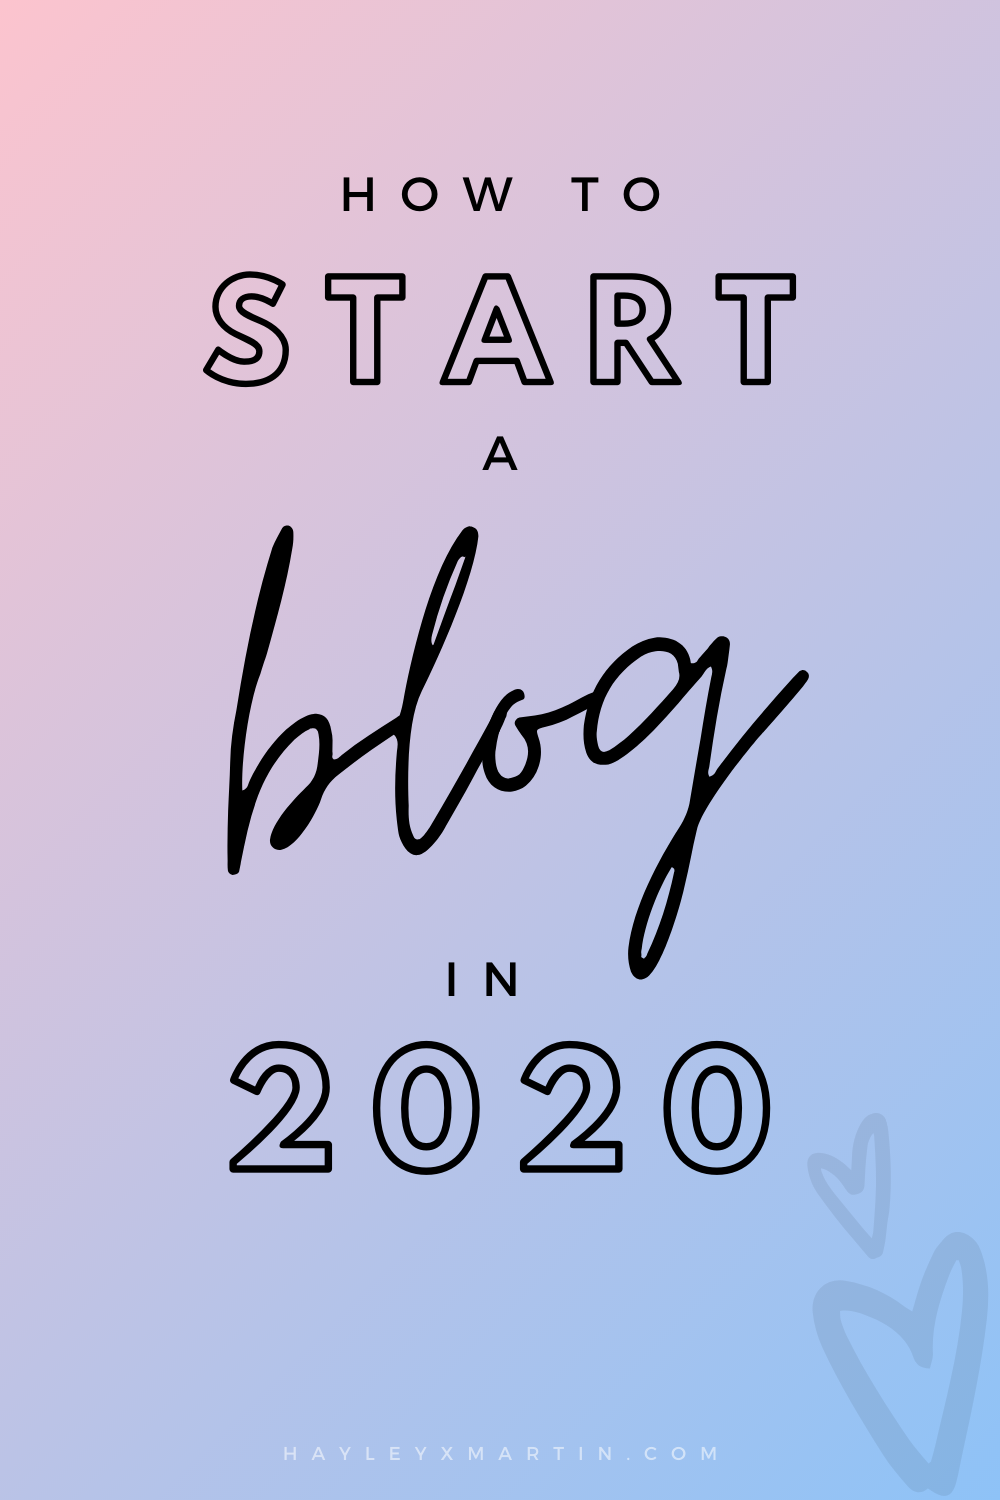 HOW TO START A BLOG IN 2020 | + TIPS FOR BEGINNERS | HAYLEYXMARTIN.COM